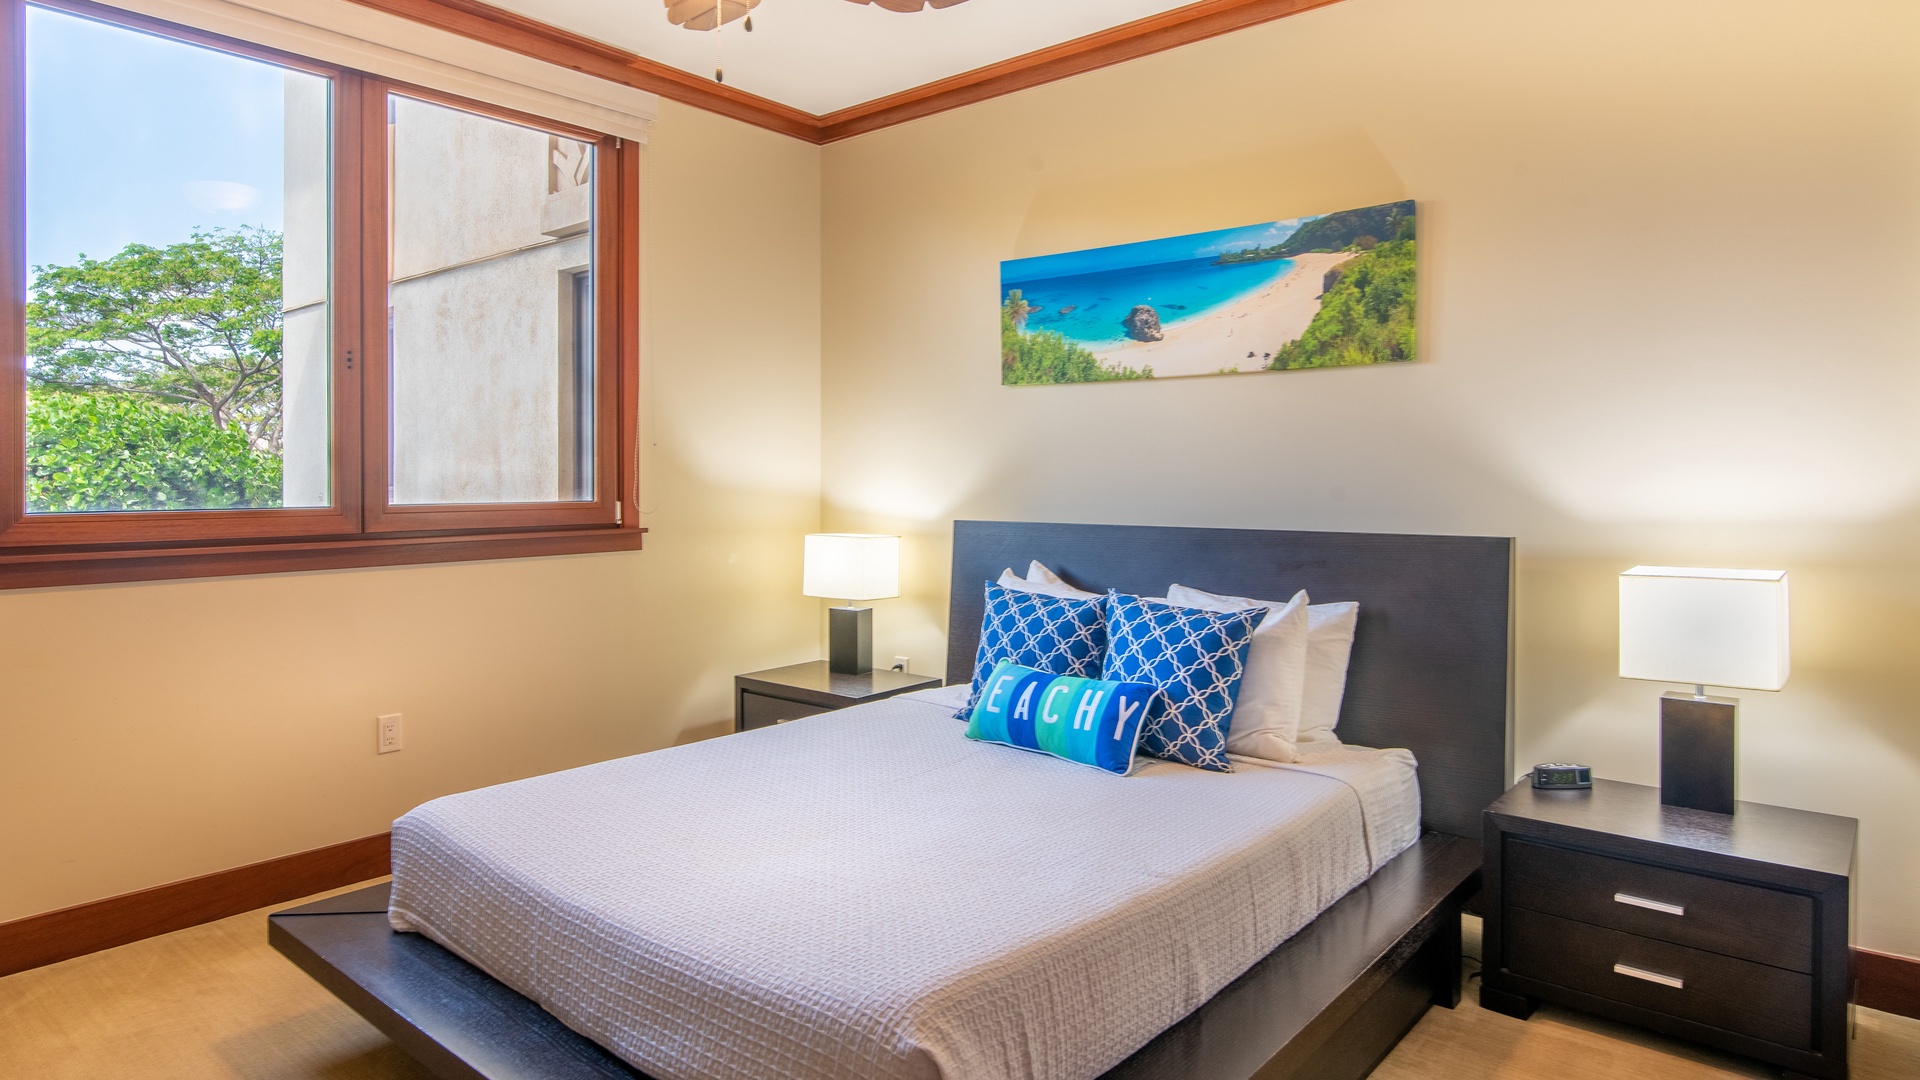 Kapolei Vacation Rentals, Ko Olina Beach Villas O210 - The second bedroom with a queen size platform bed and vibrant art.